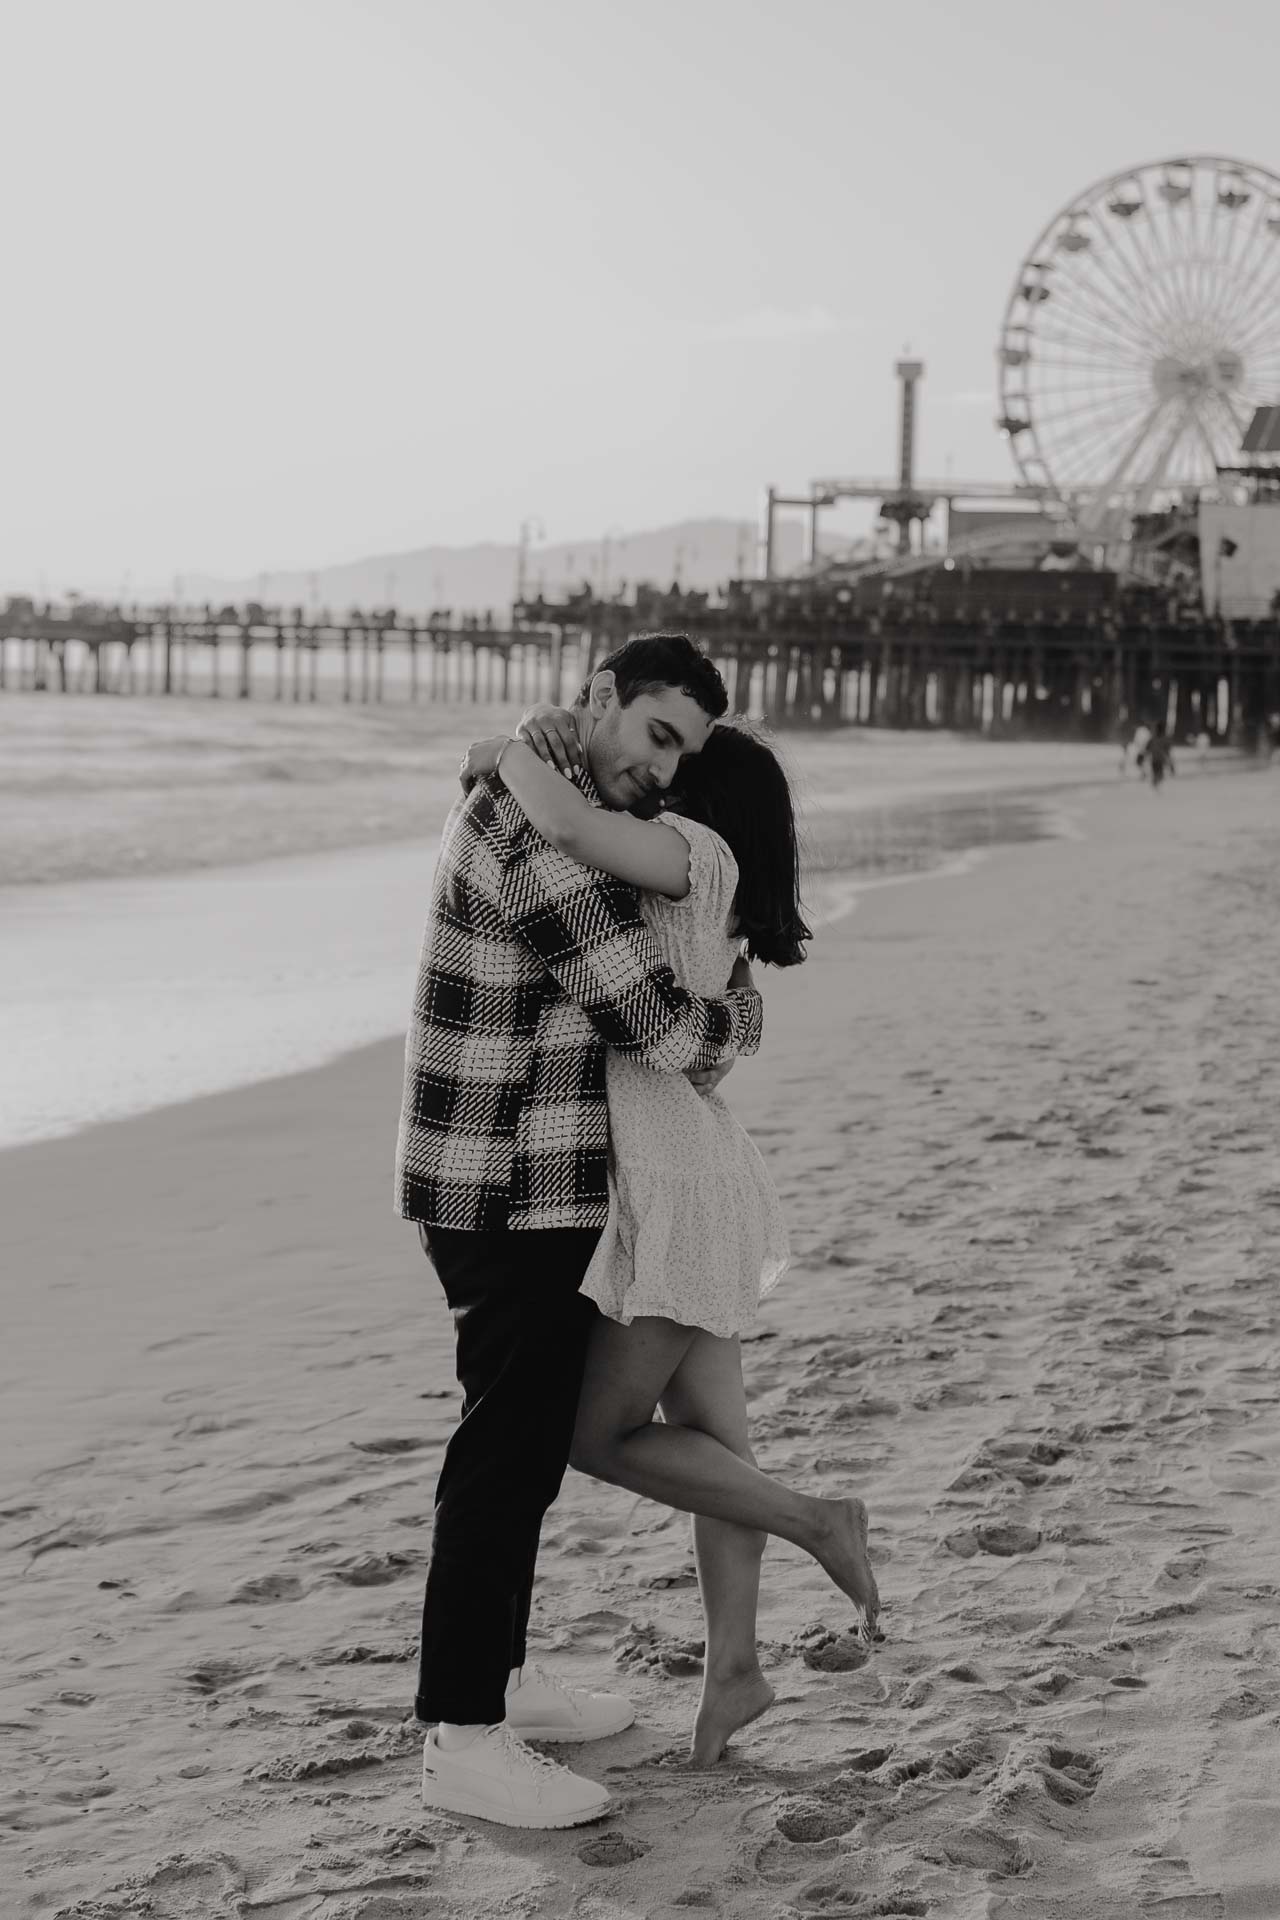 do you want to propose to your girlfriend at santa monica beach with a photographer?